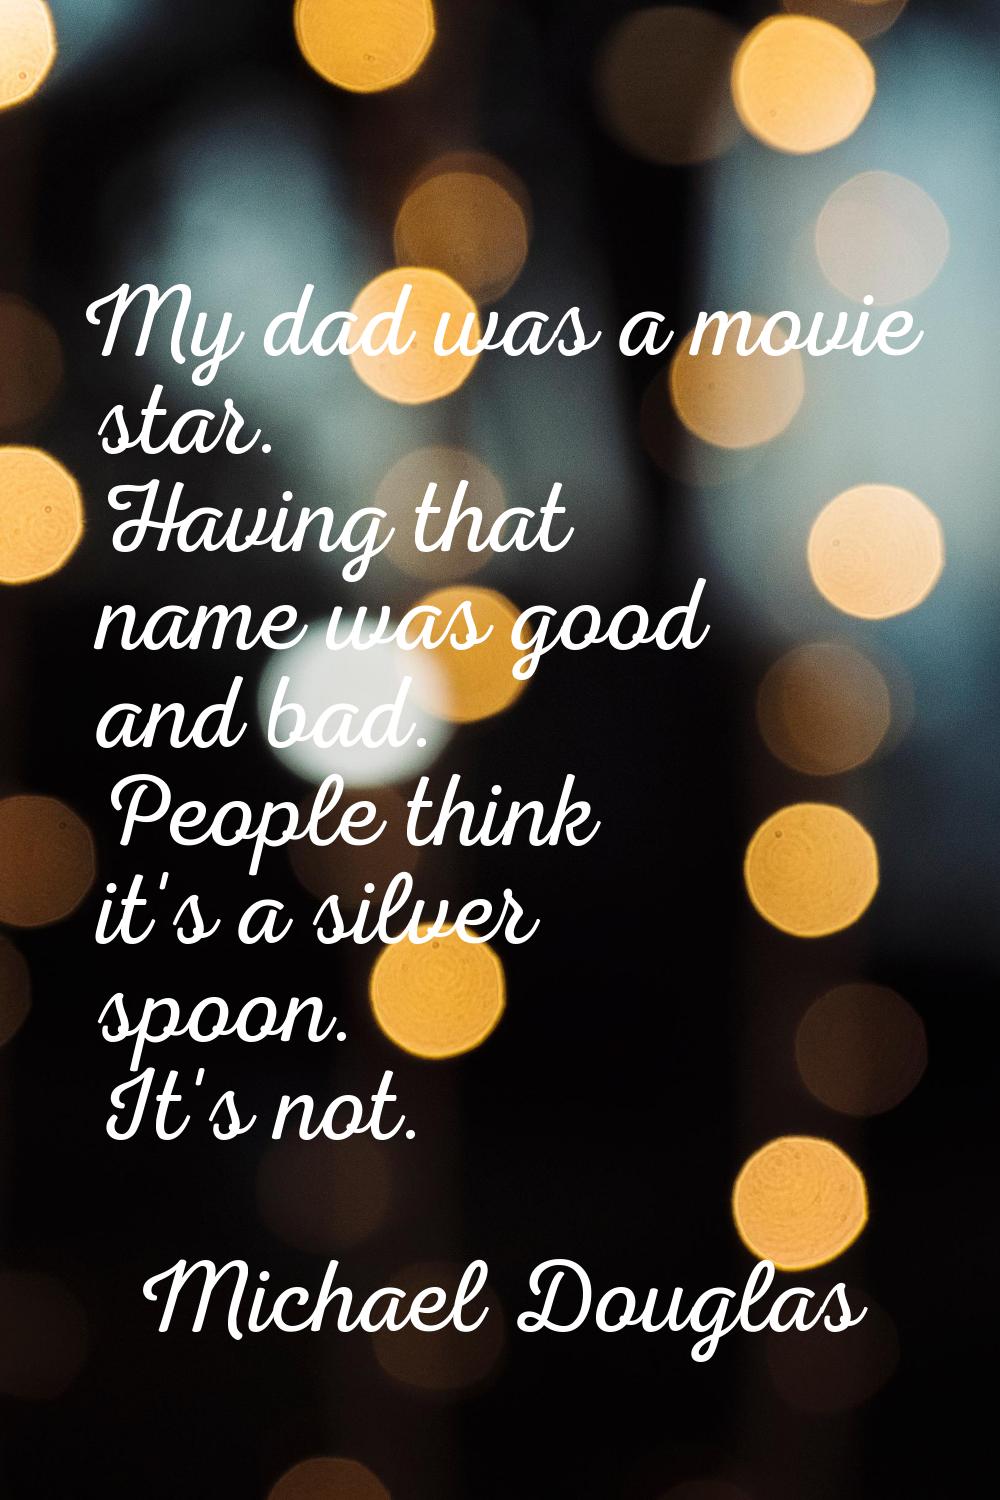 My dad was a movie star. Having that name was good and bad. People think it's a silver spoon. It's 